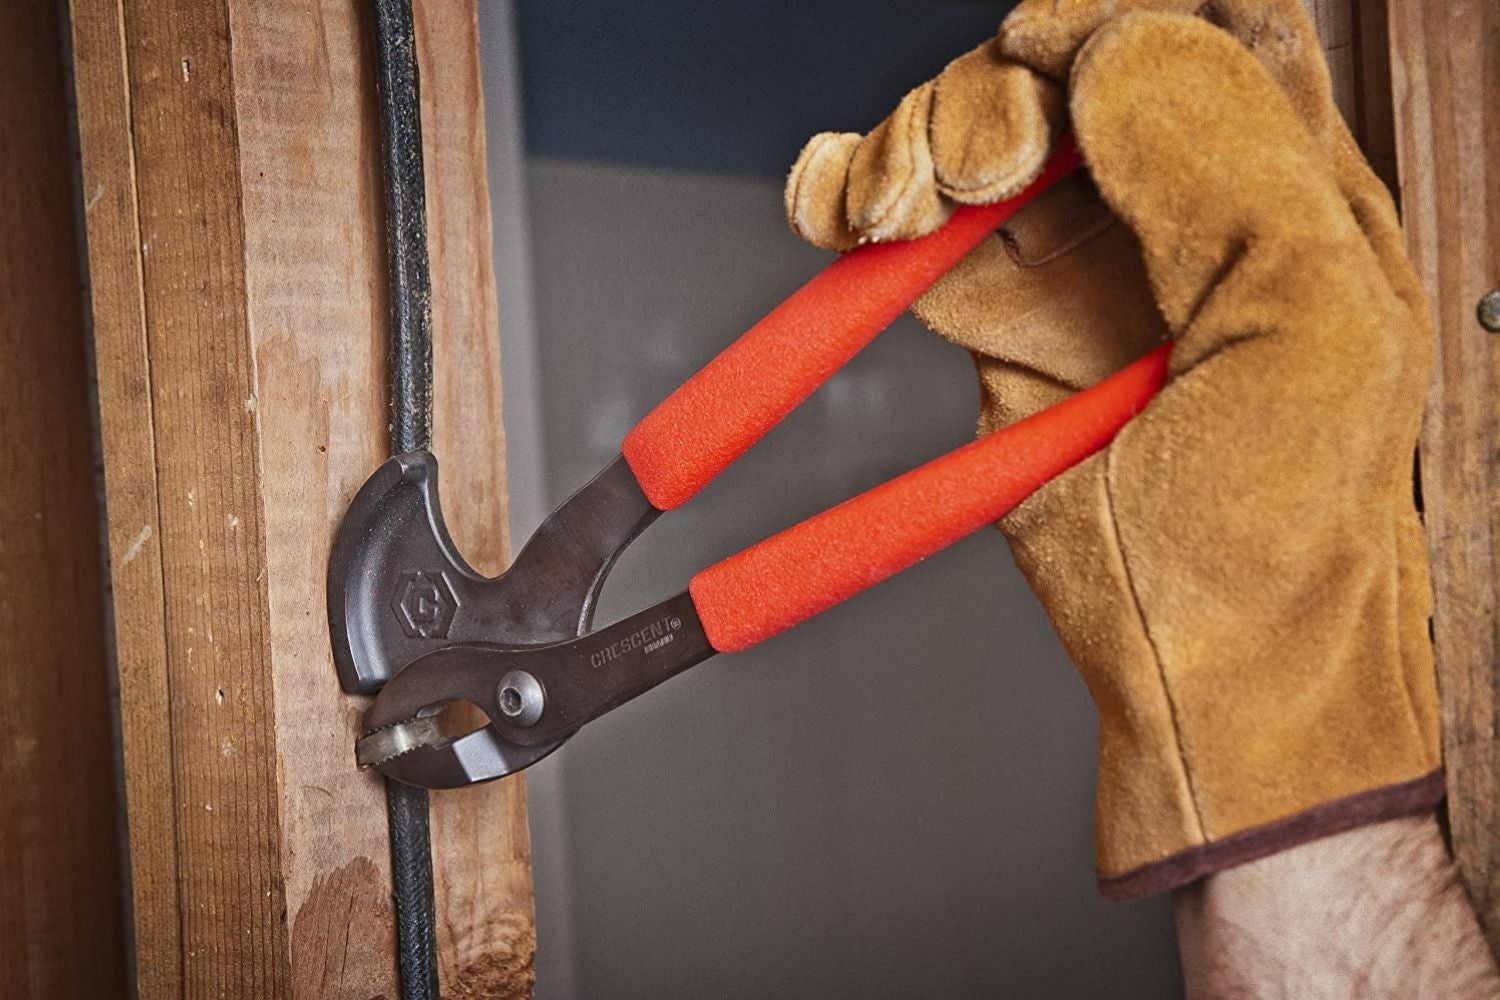 The Best Nail Puller Options for Your Projects in 2021 - Bob Vila